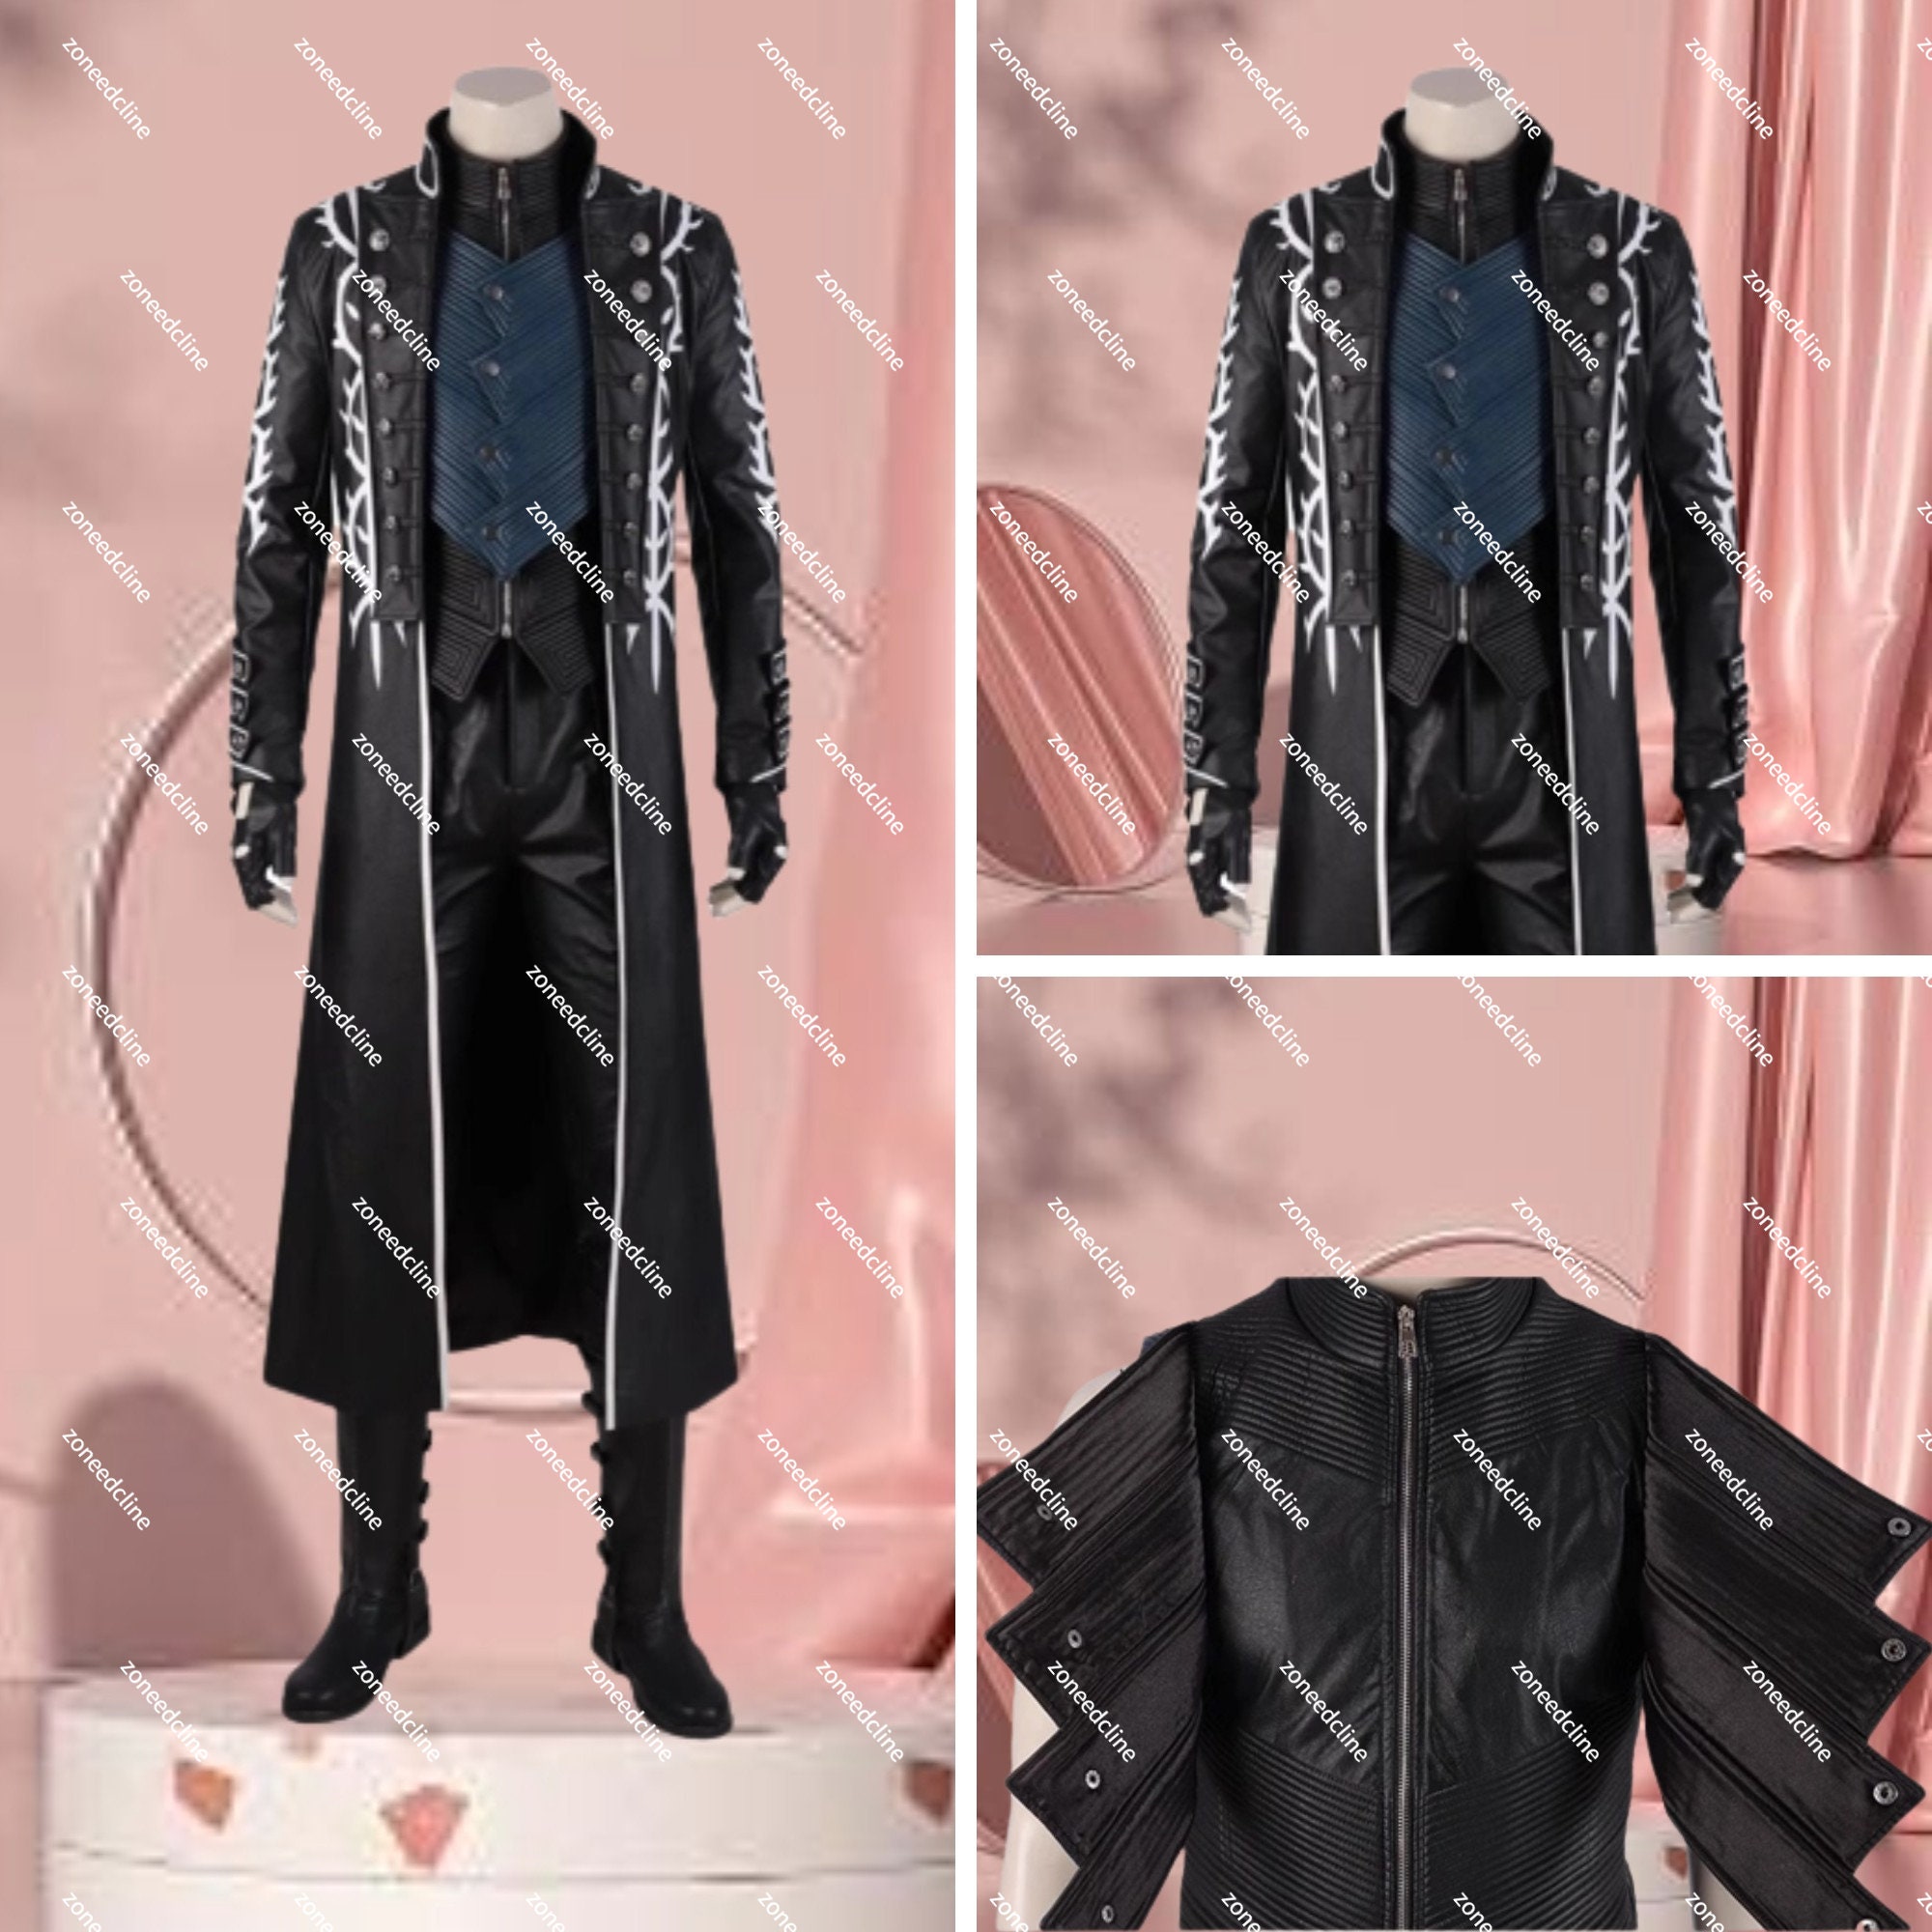 Devil May Cry 4 DMC4 Dante Pleather Jacket Trench Coat cosplay costume Full  Set